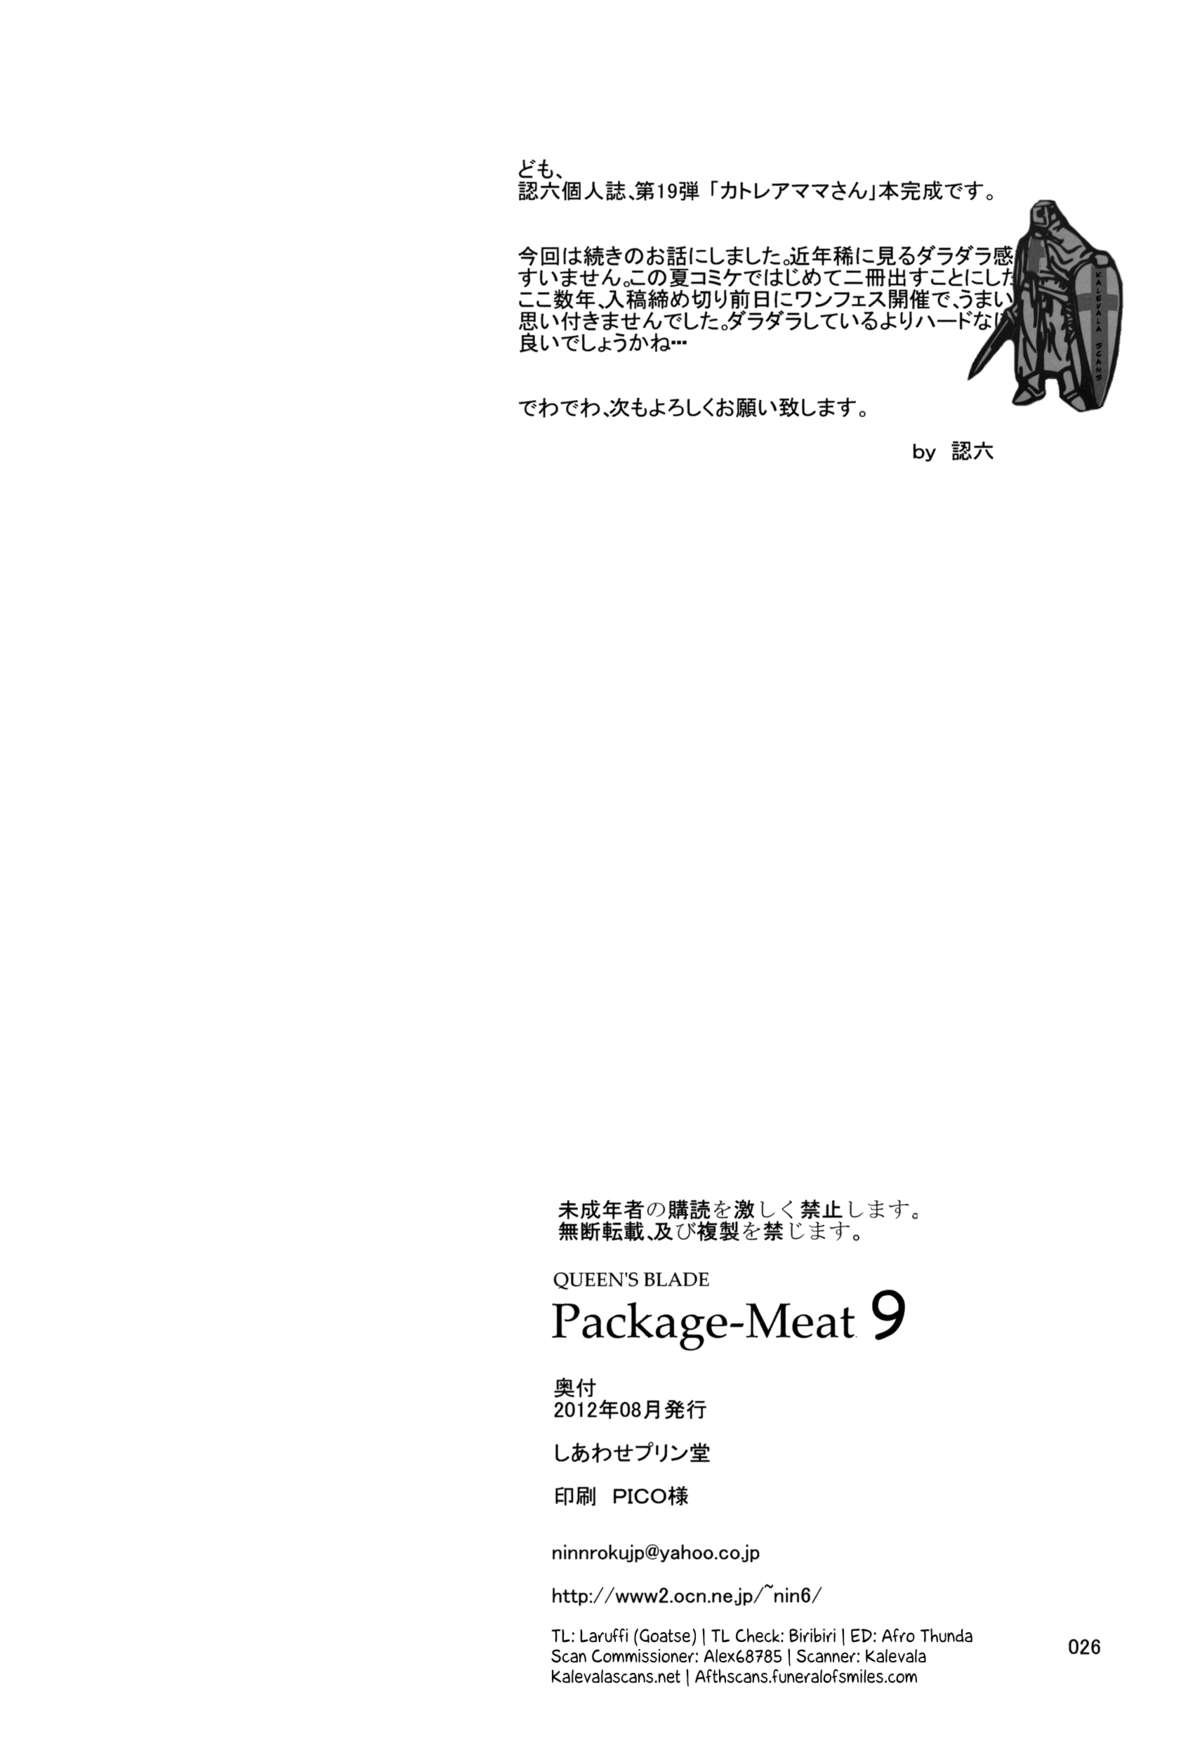 PACKAGE MEAT 9 - 25